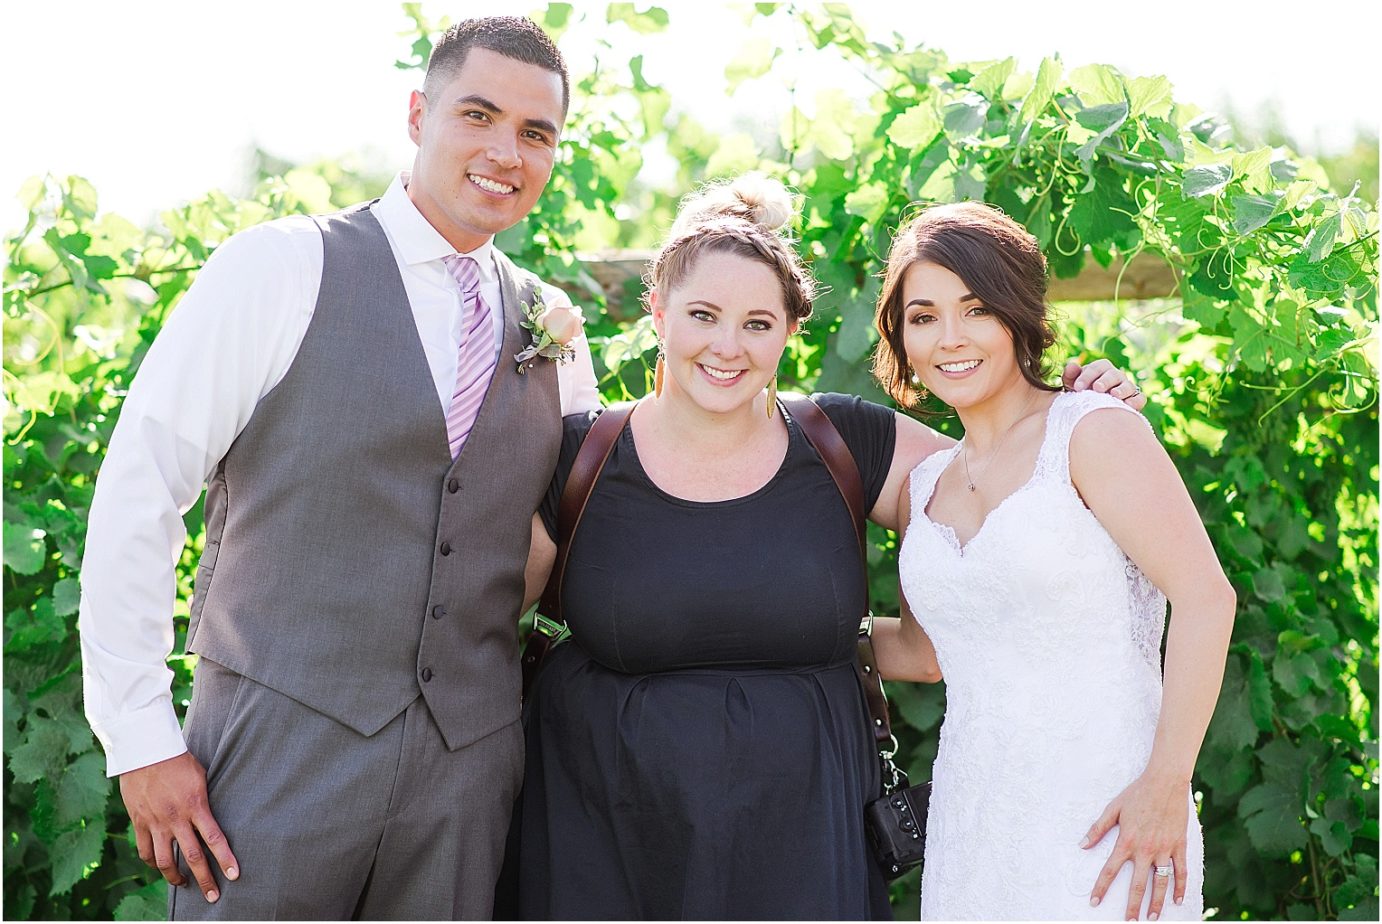 Fontaine Estates Winery Wedding Naches WA Jorge and Robin with Misty C. Photography